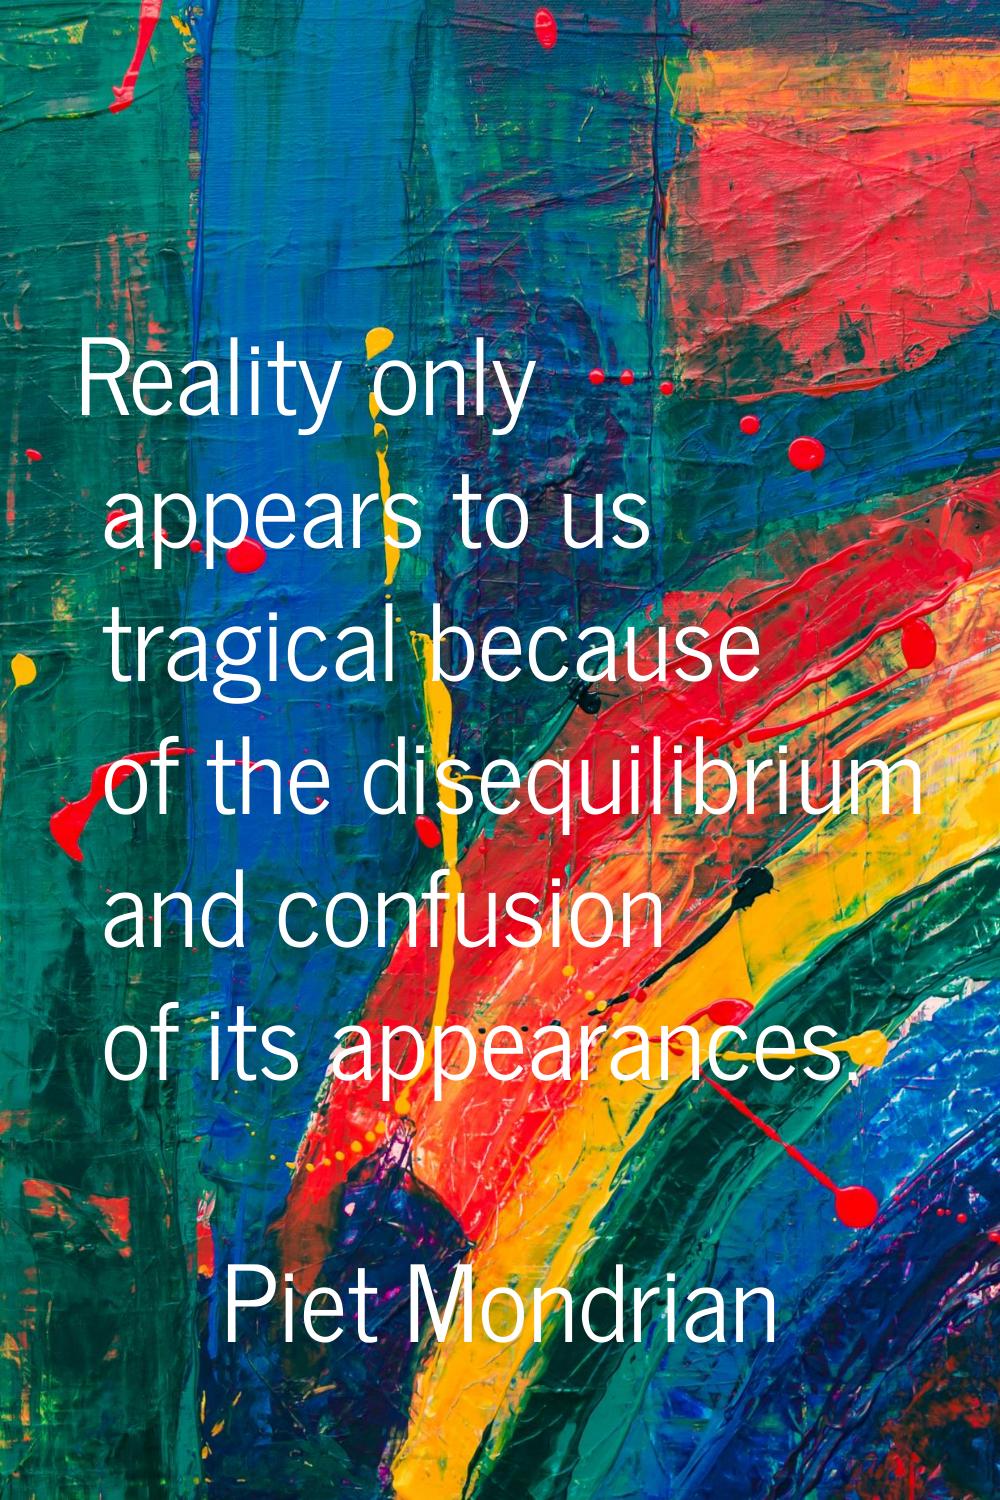 Reality only appears to us tragical because of the disequilibrium and confusion of its appearances.